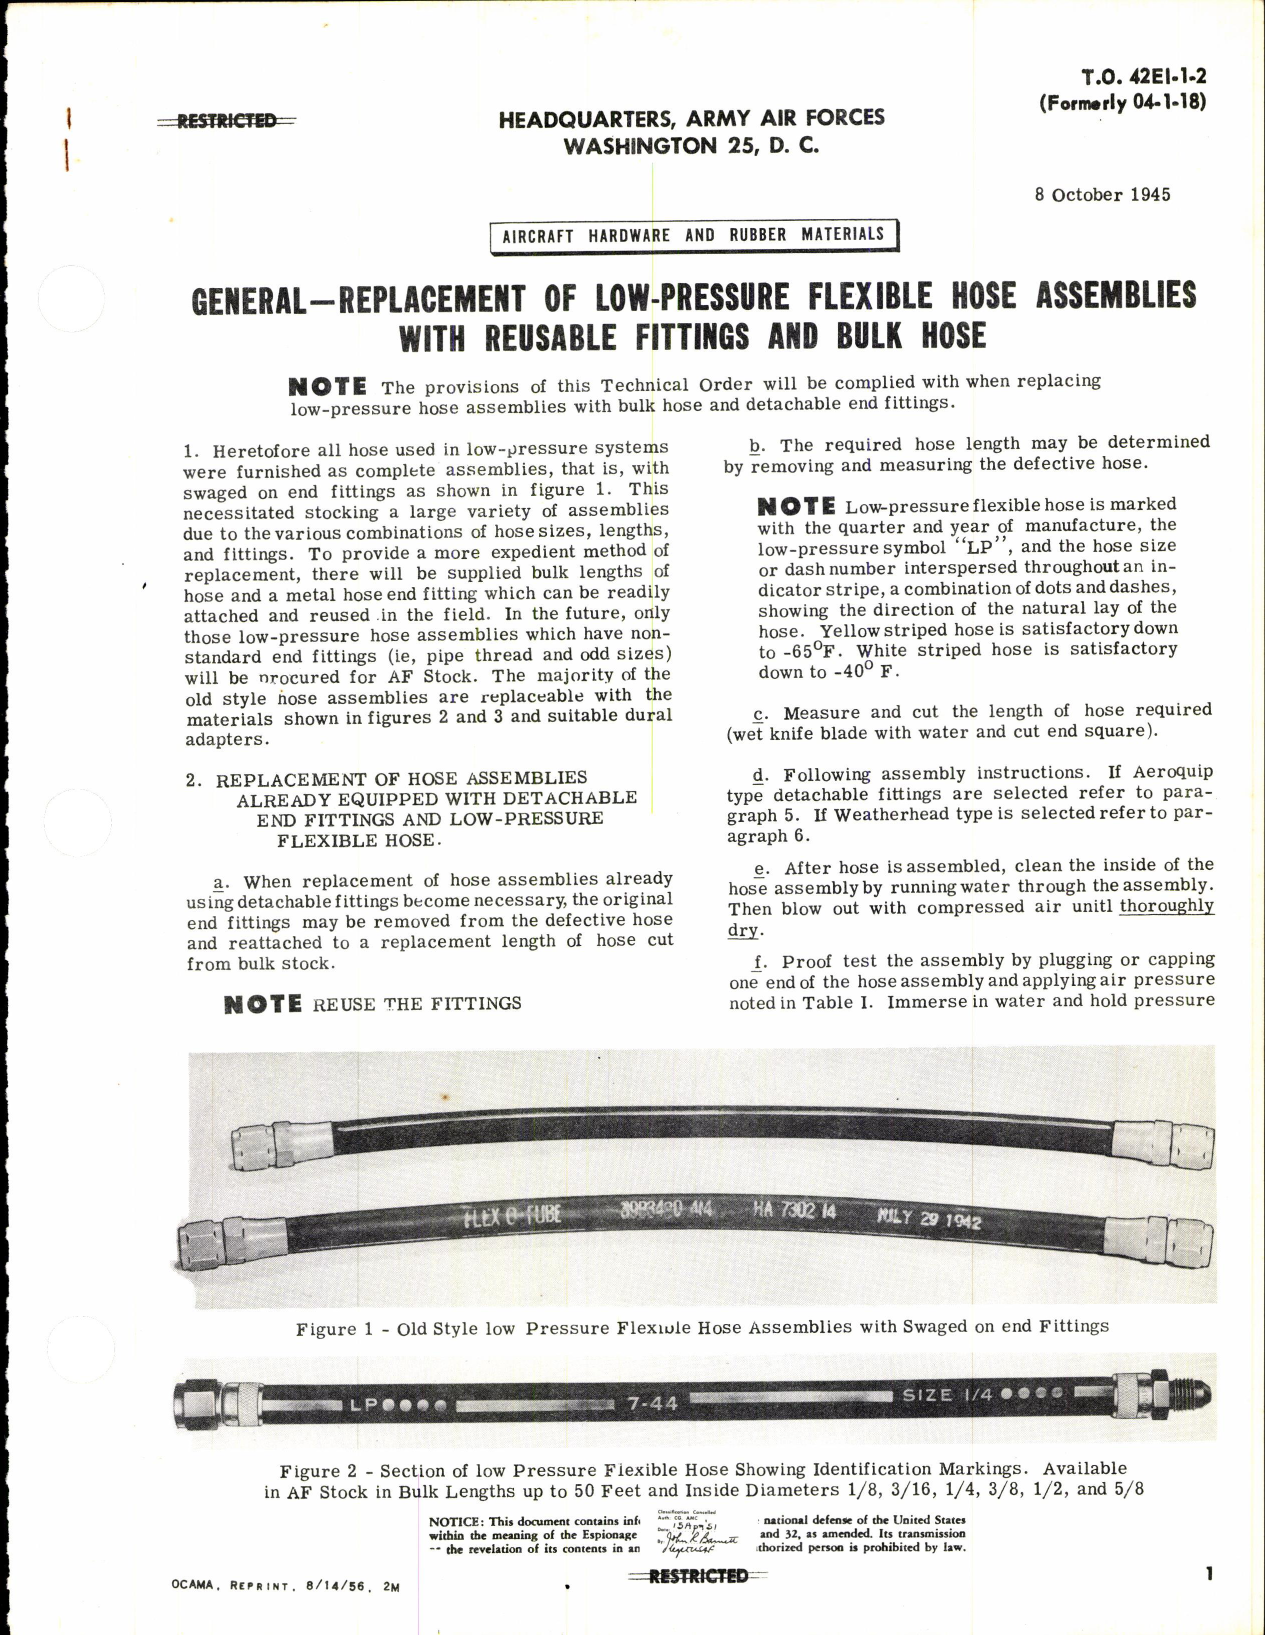 Sample page 1 from AirCorps Library document: Replacement of Low-Pressure Flexible Hose Assemblies